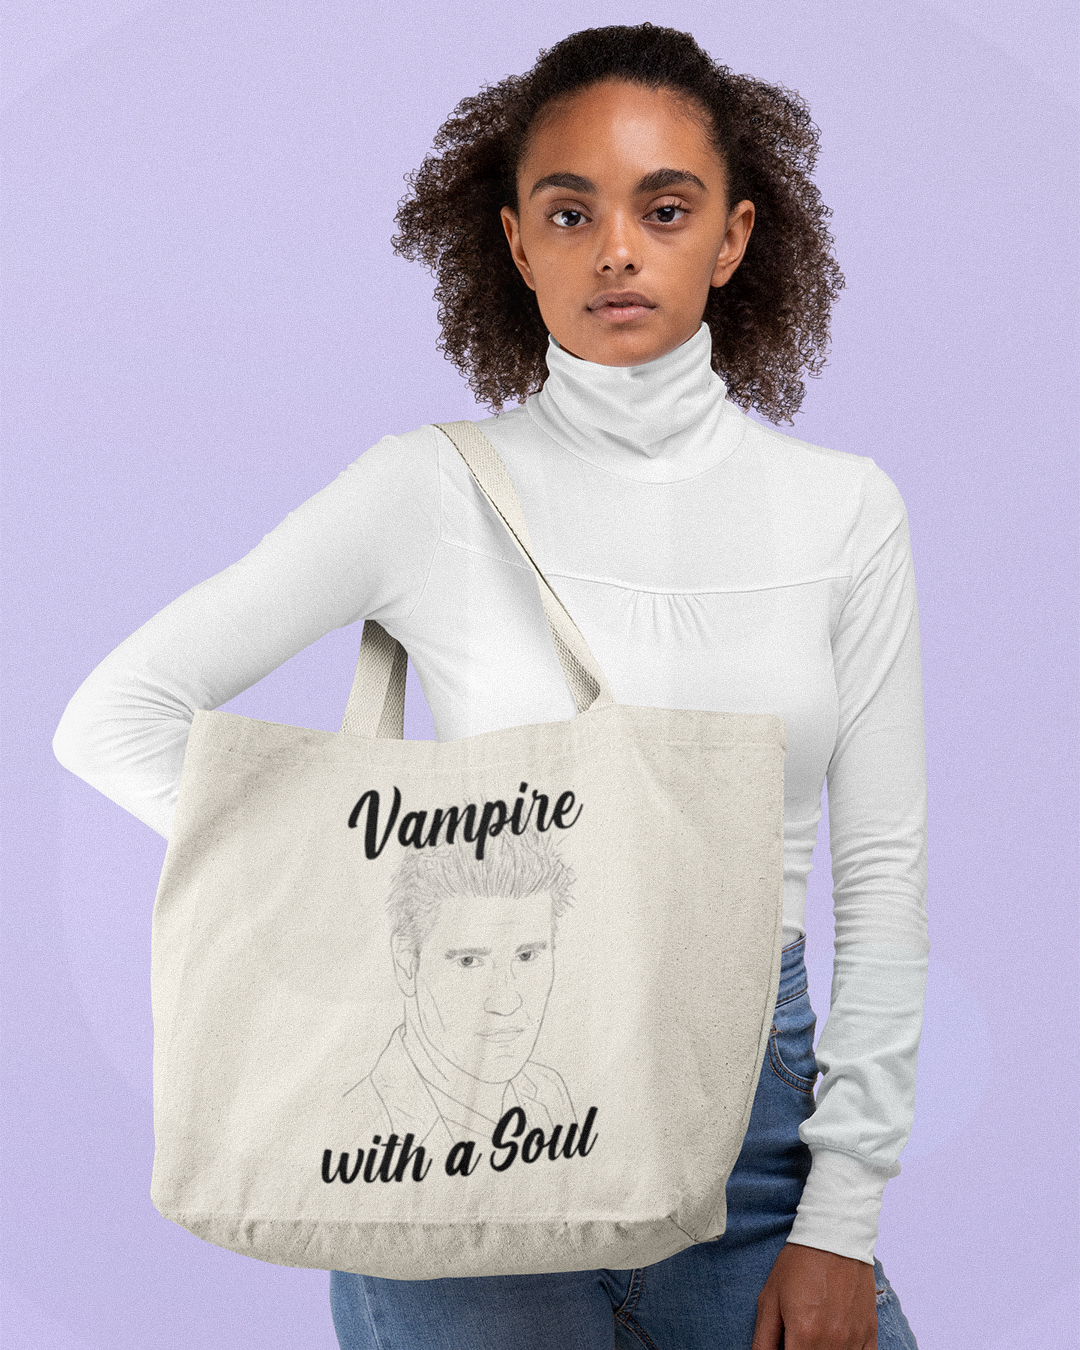 Vampire With A Soul Tote Bag - Buffy The Vampire Slayer Inspired Tote Bag - Buffy Angel Tote Bag Shopper - Vampire With A Soul Buffy The Vampire Slayer Inspired Tote Bag